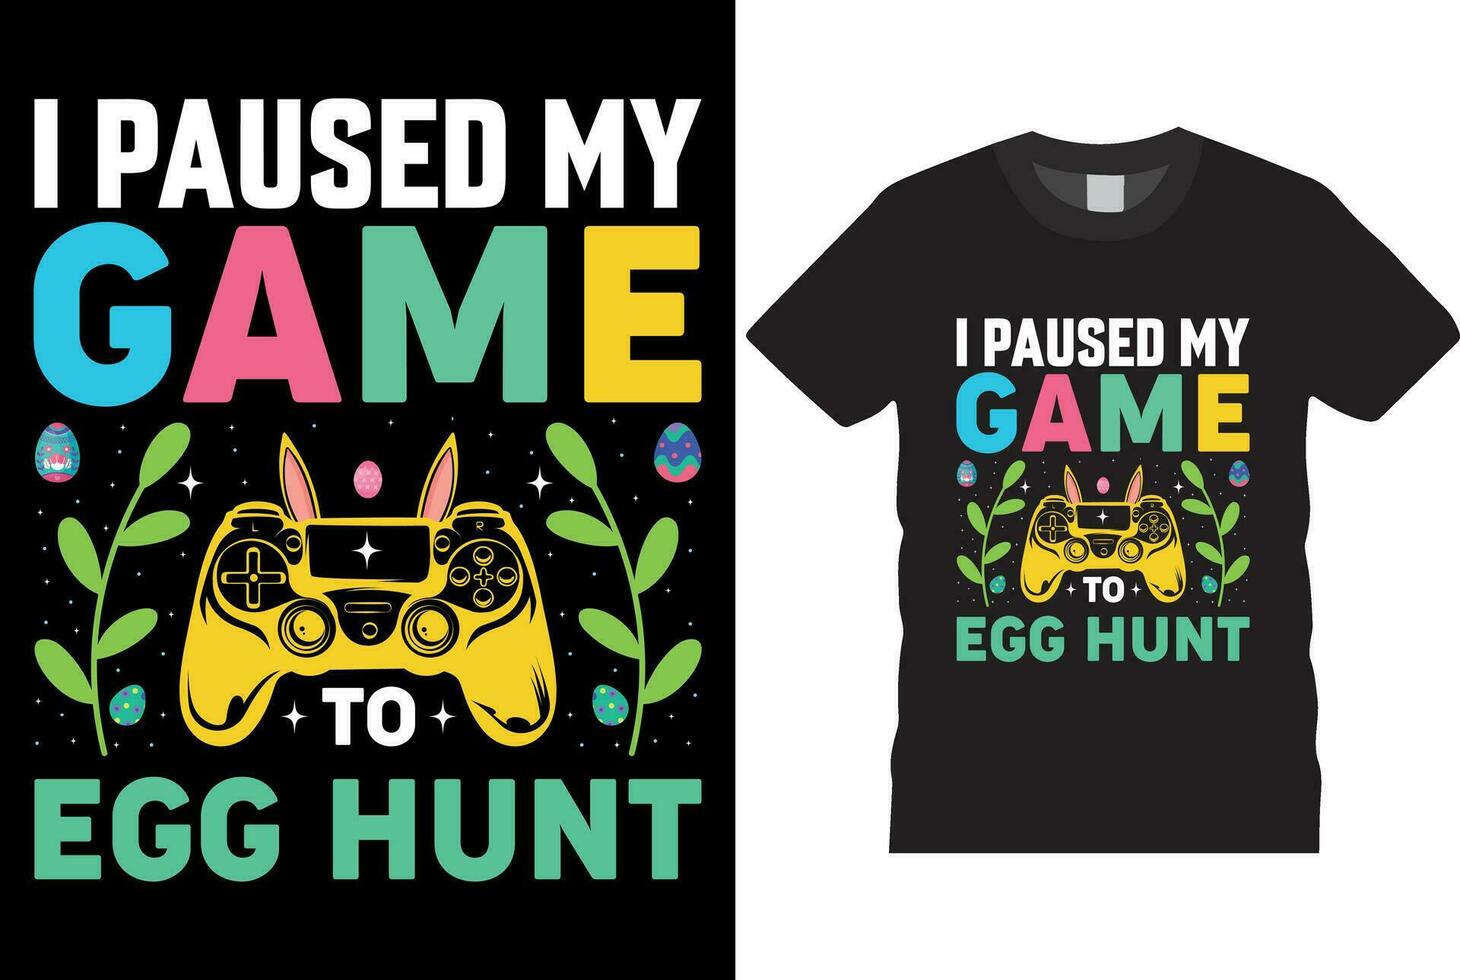 I Paused My Game To Egg Hunt t-shirt design vector template